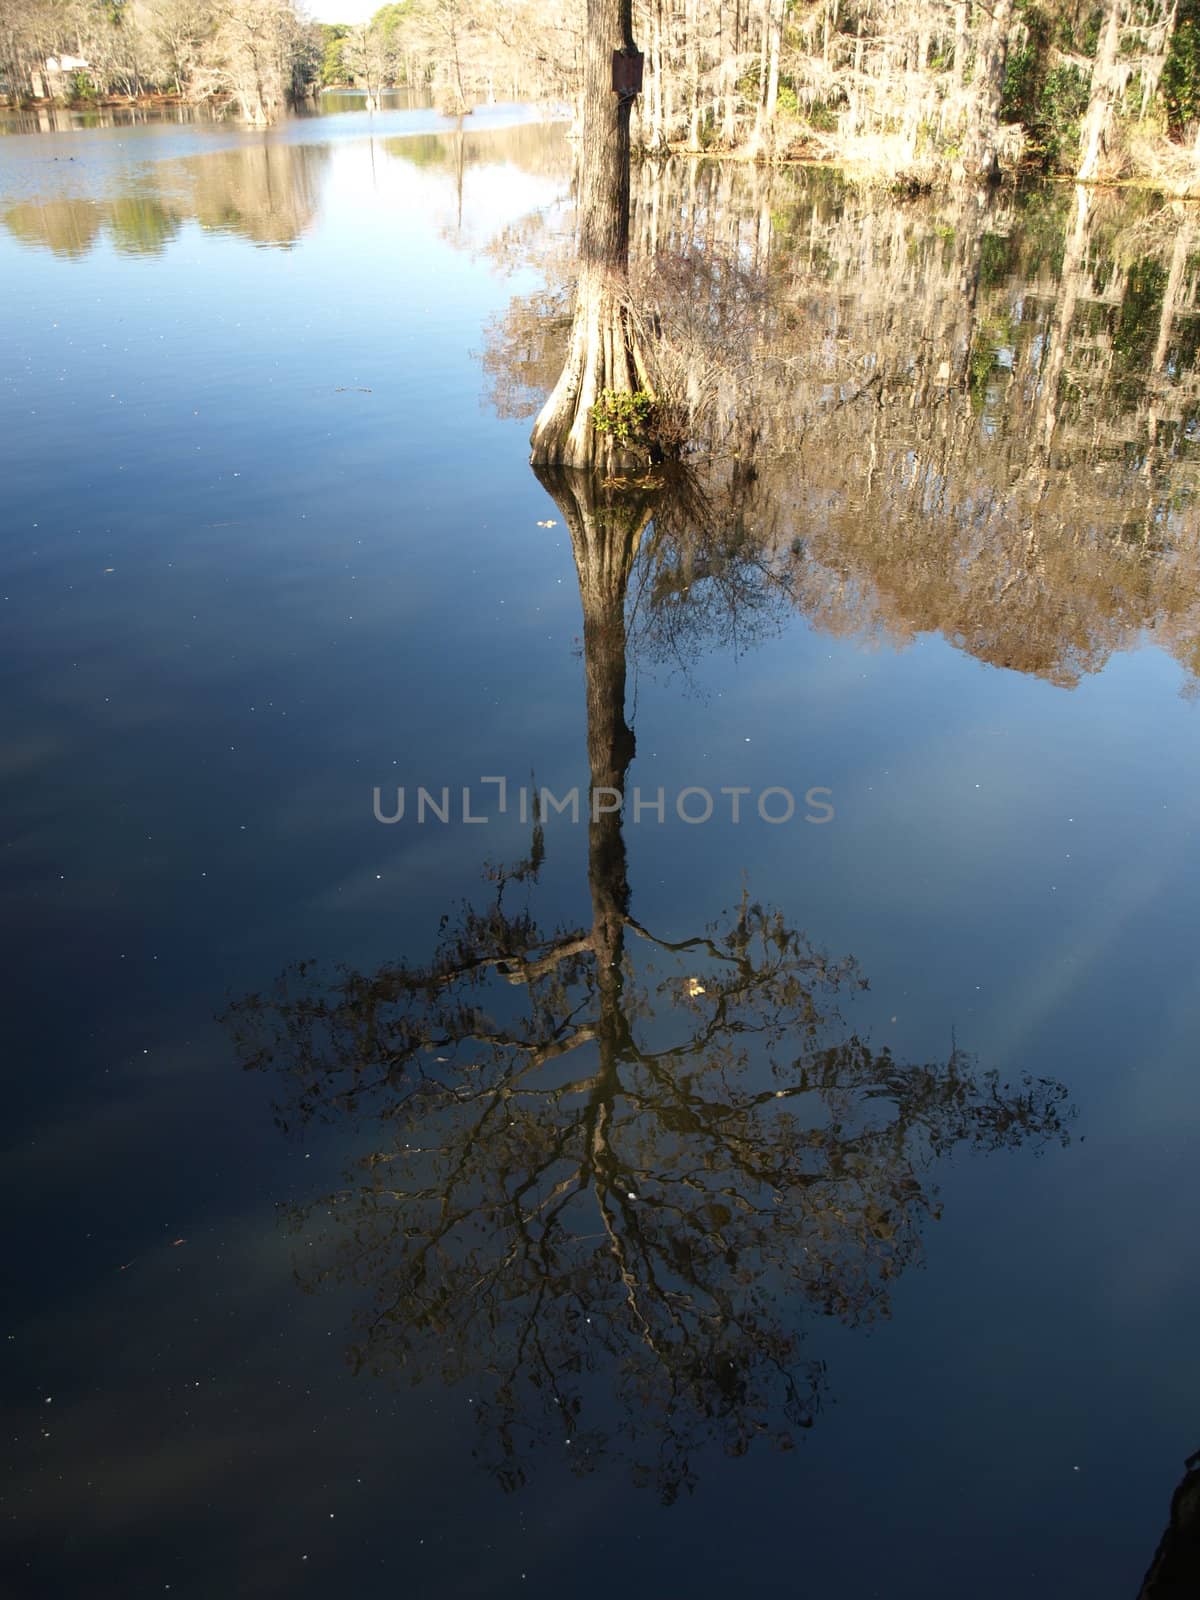 Trees along the shore of a swampy lake. One reflecting off the water